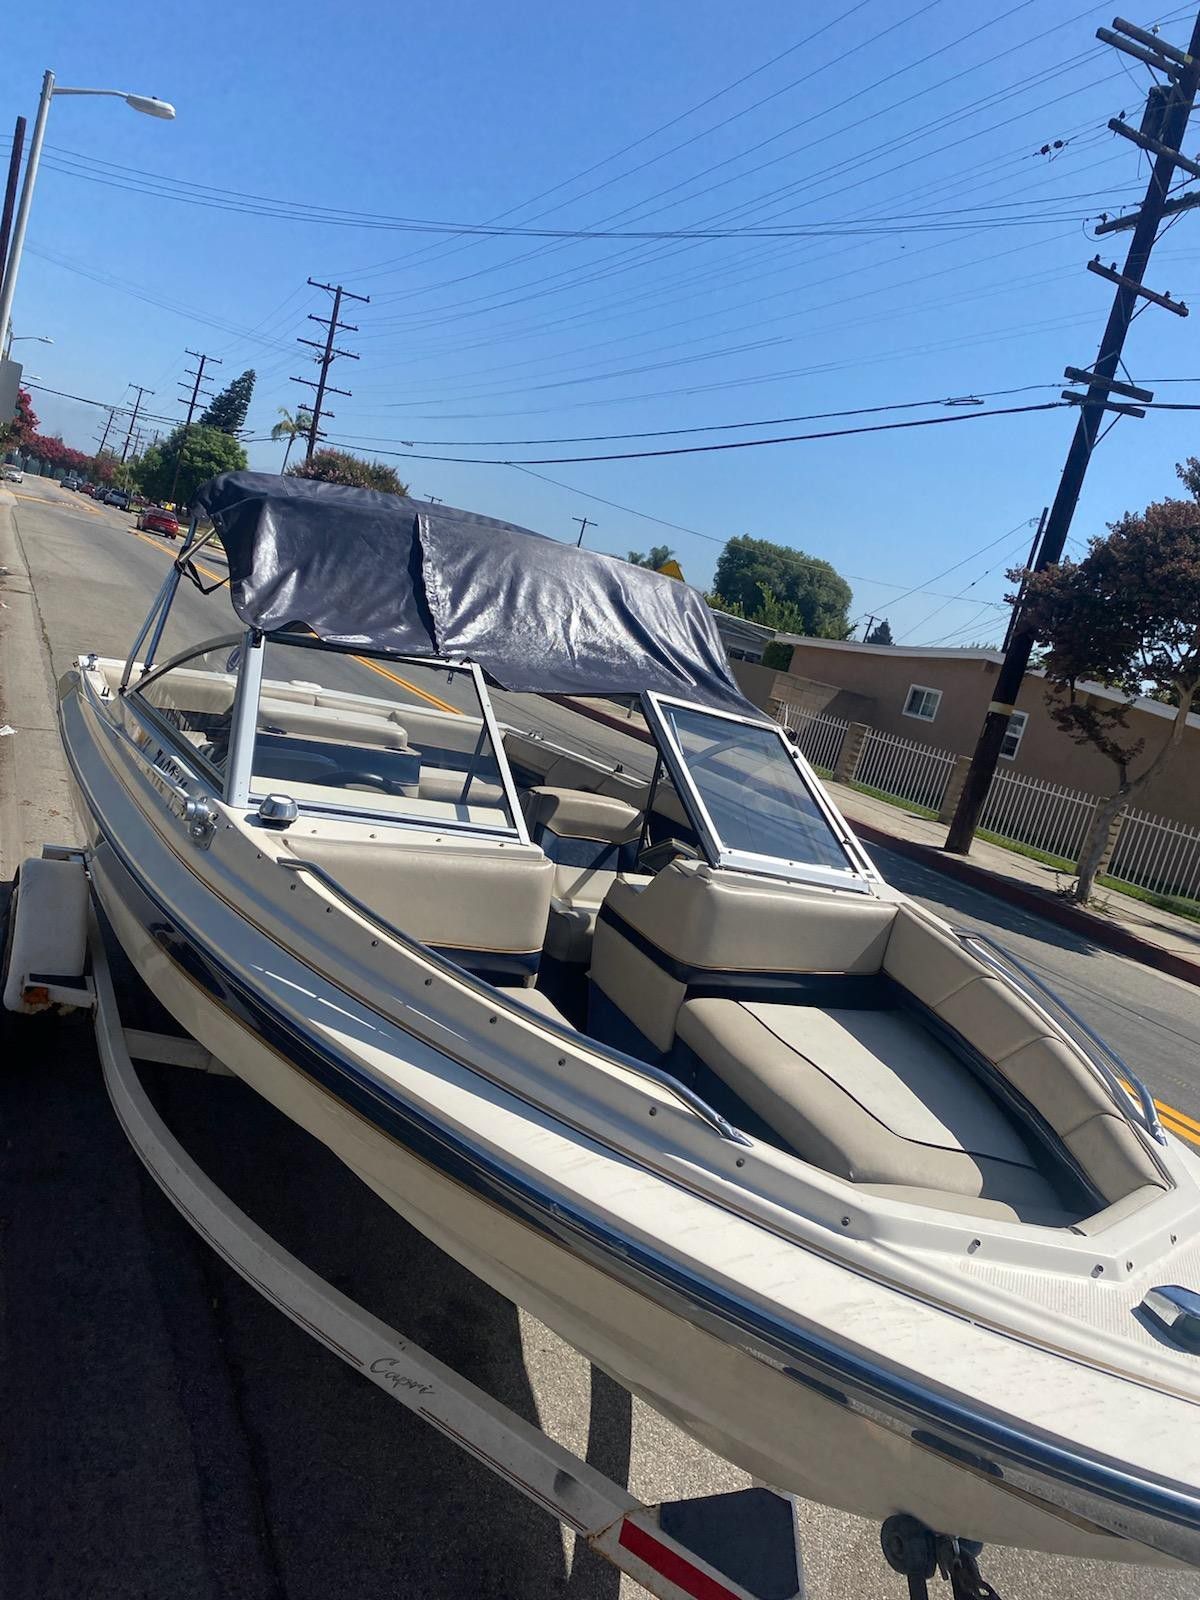 1997 Bayliner boat fully serviced. Ready for water today